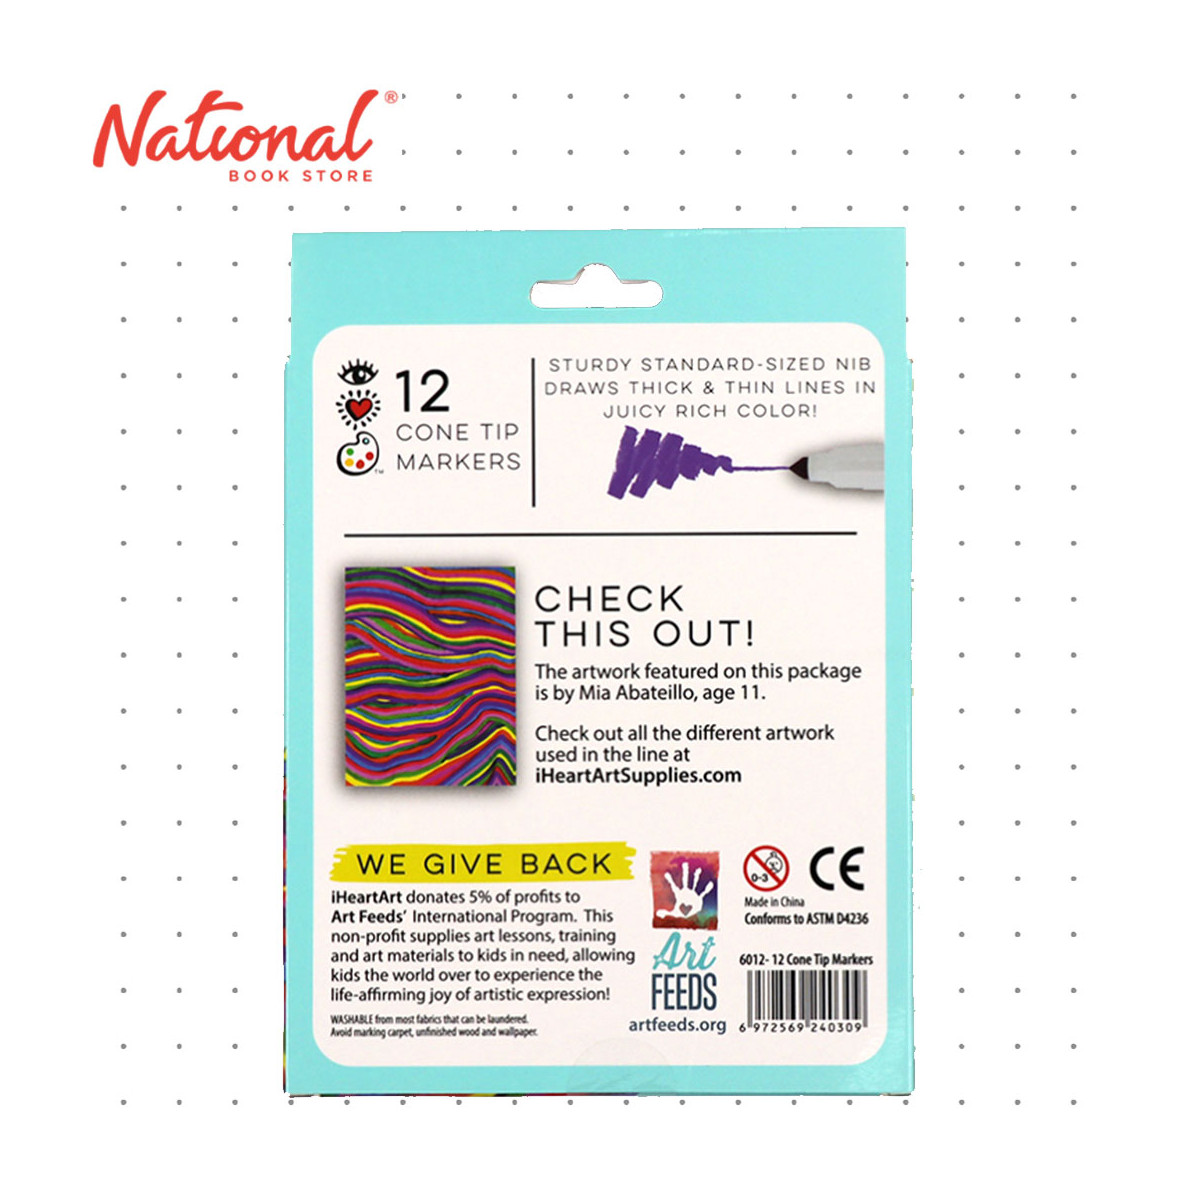 https://www.nationalbookstore.com/149047-thickbox_default/iheartart-cone-tip-markers-12-assorted-colors-6012-arts-crafts-supplies.jpg